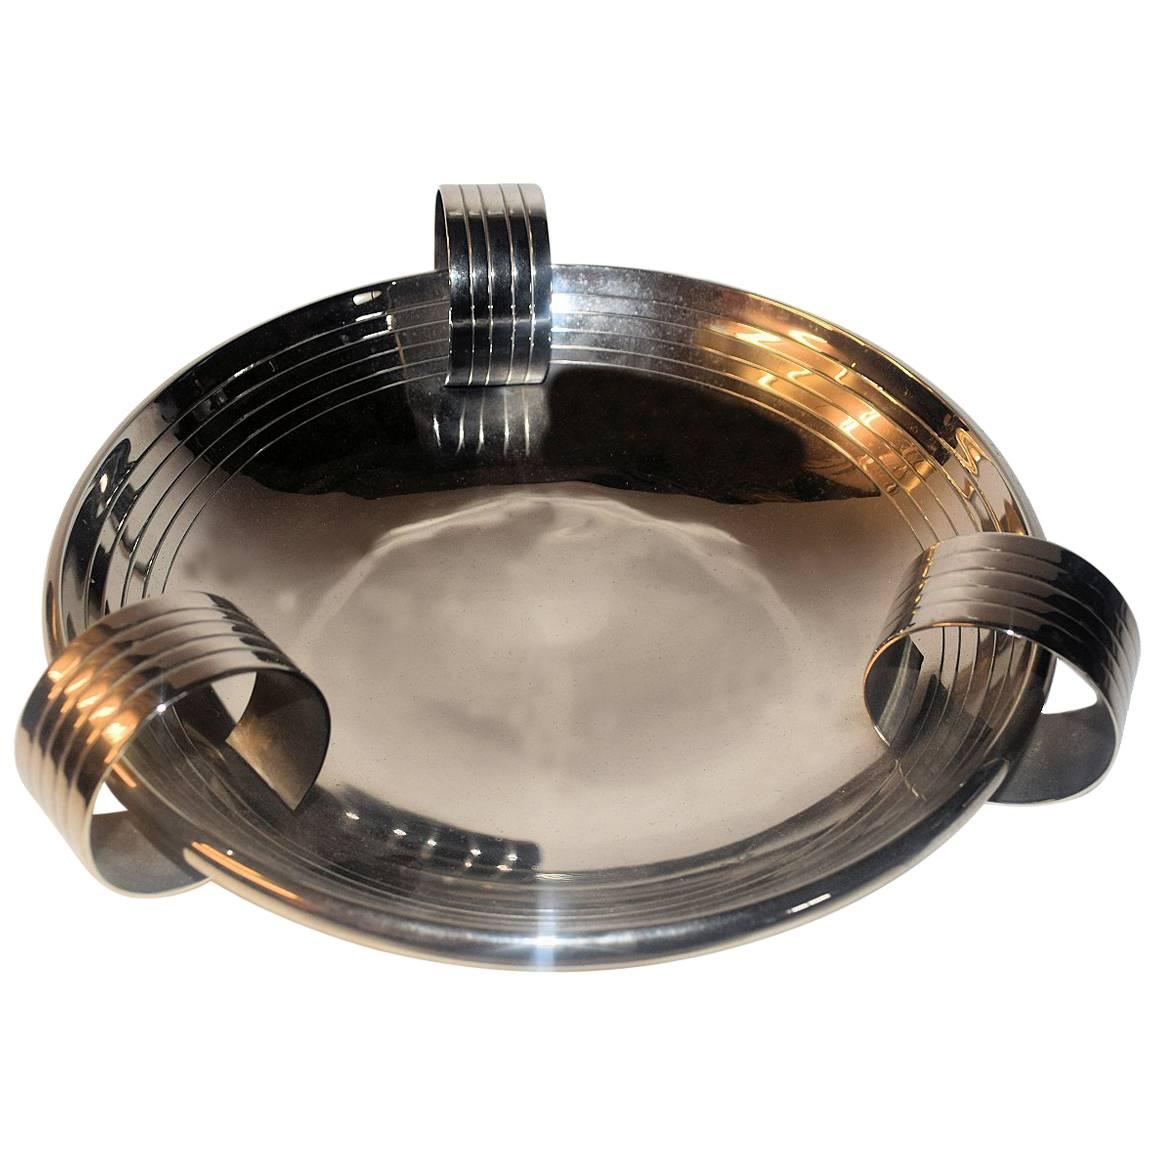 Superbly Stylish Art Deco Silver Plated Modernist Bowl